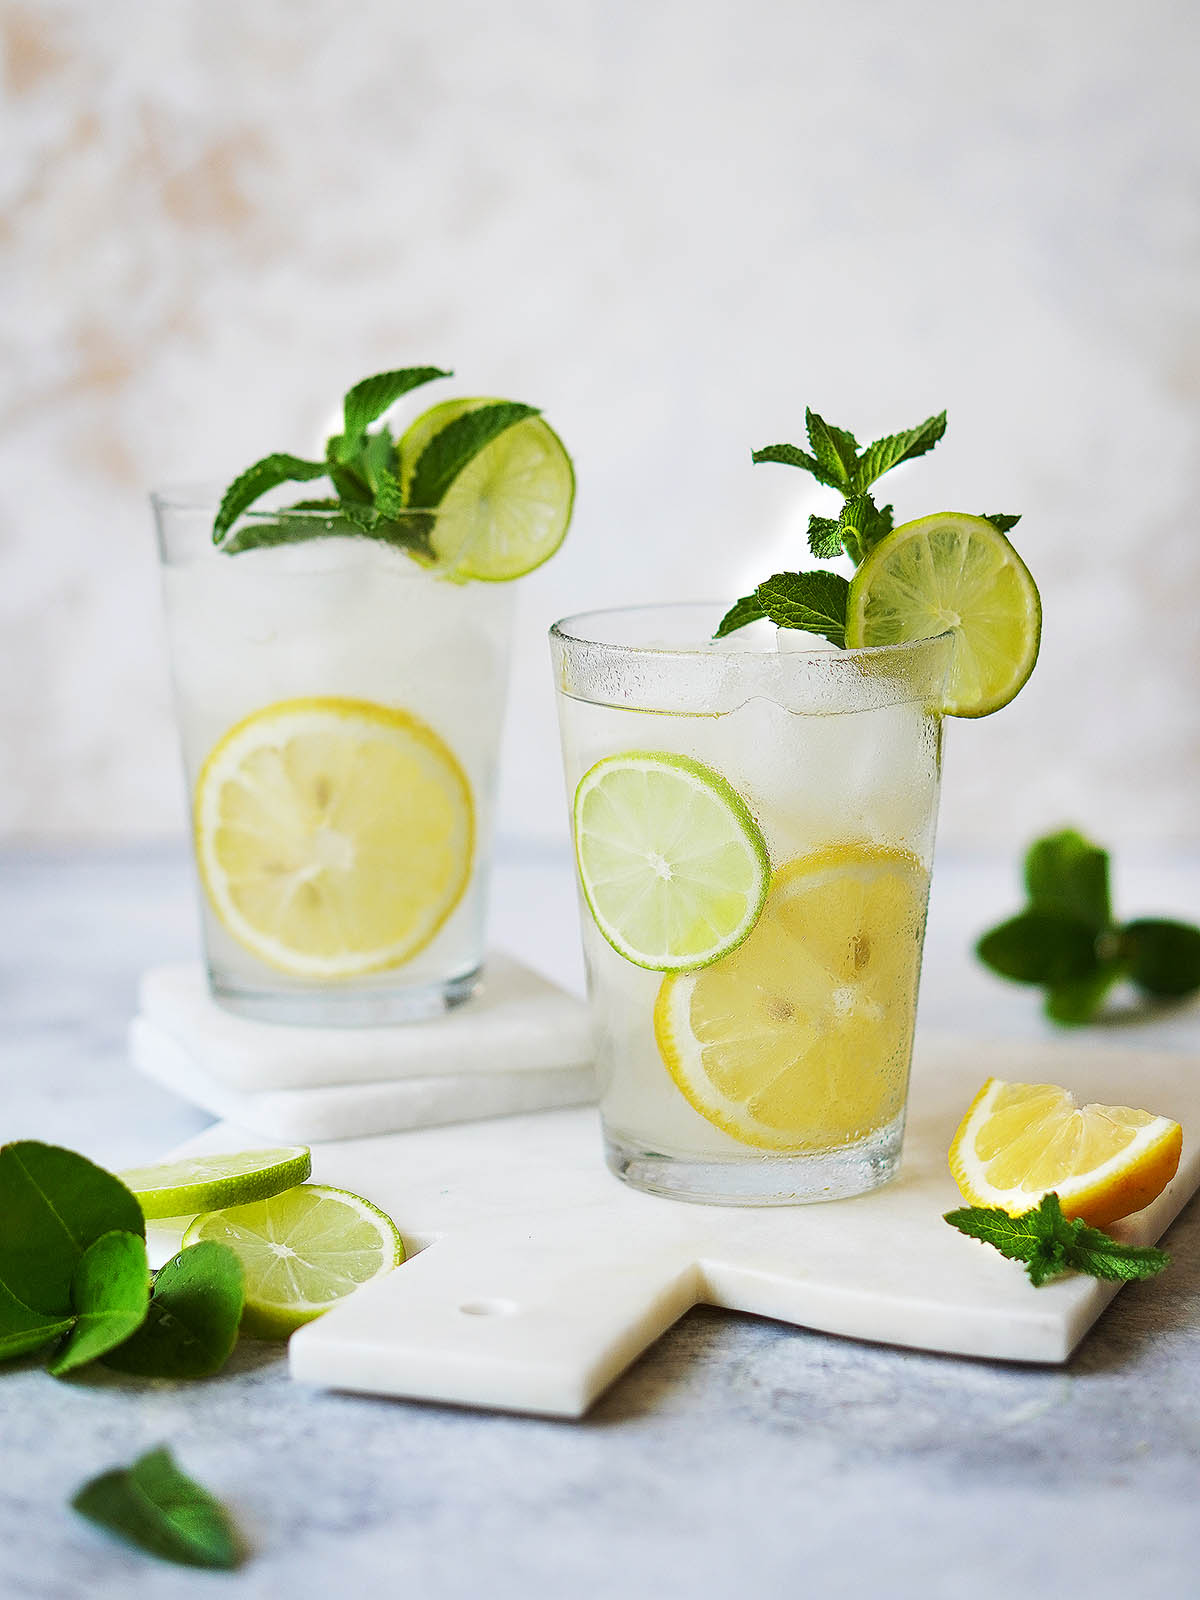 Two glasses filled with ice and lemonade garnished with lemons.